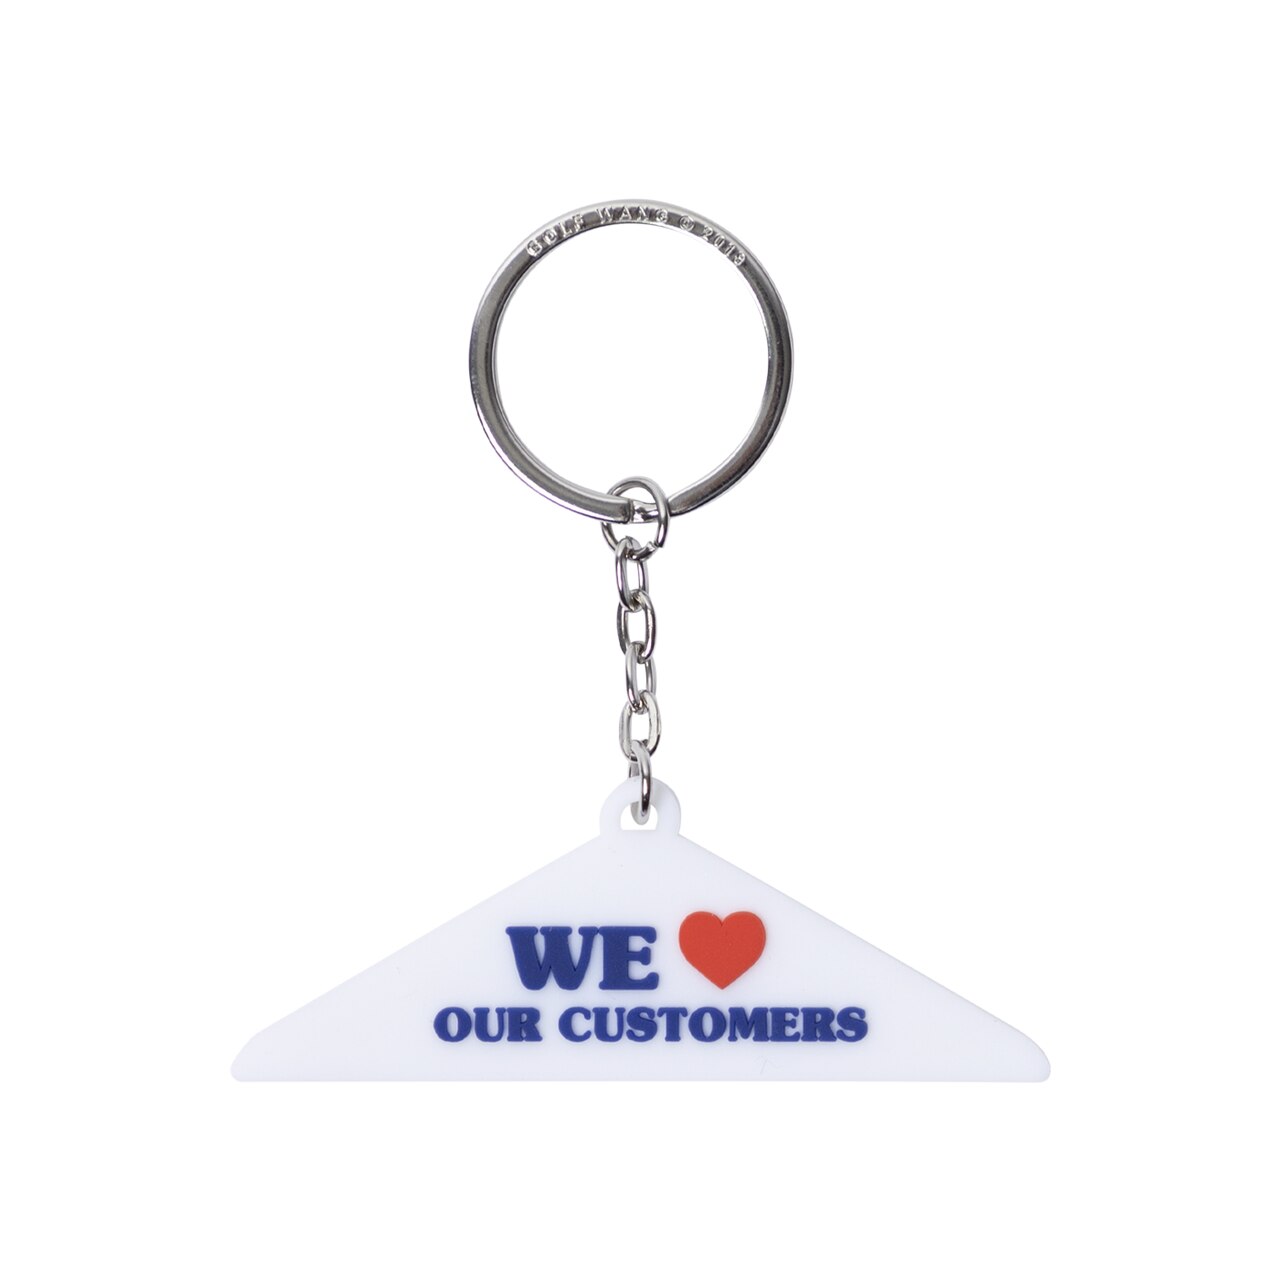 WE LOVE OUR CUSTOMERS KEYCHAIN oc